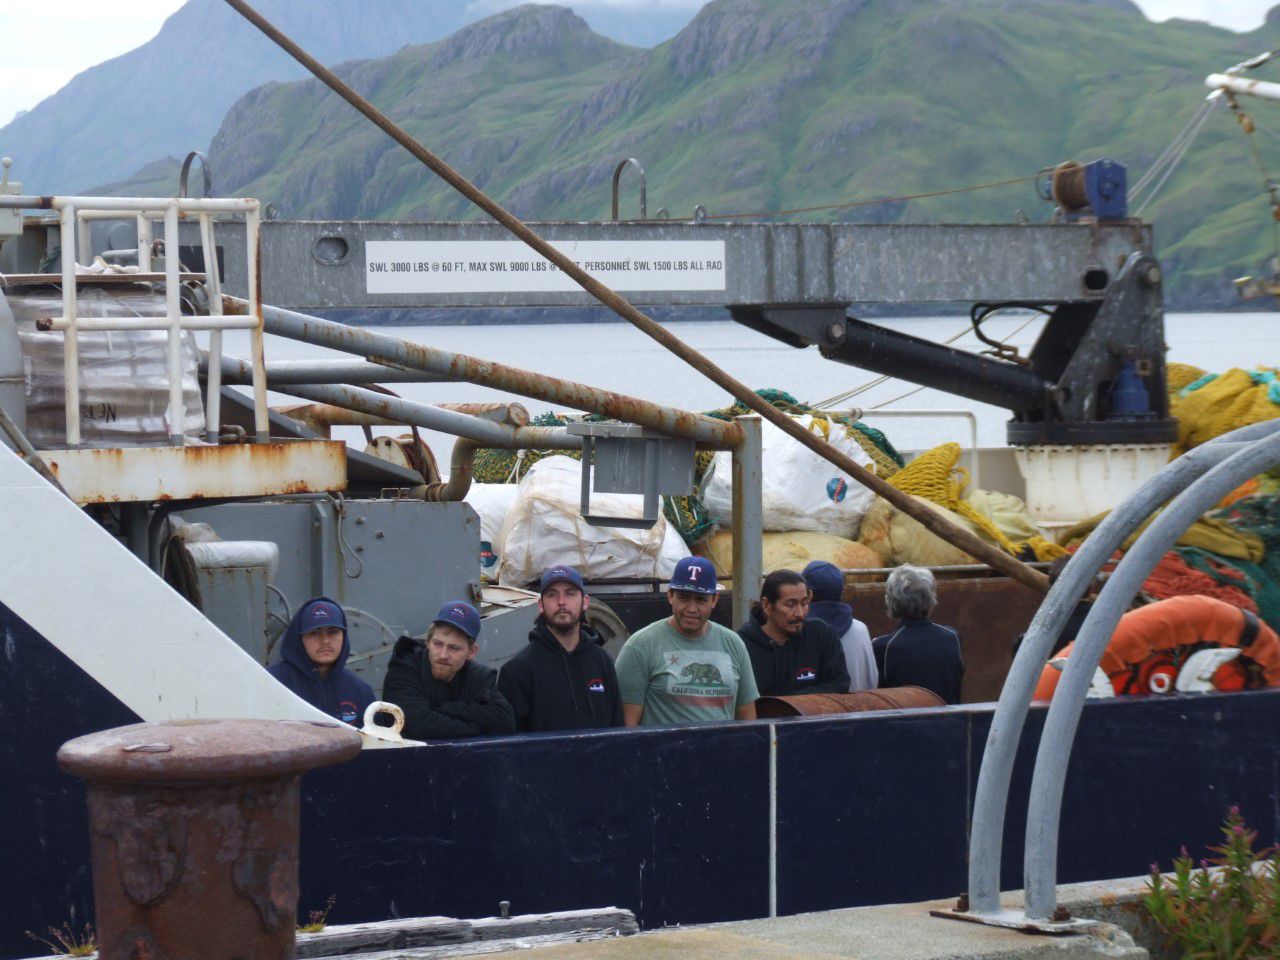 Search called off for missing factory trawler Alaska Juris